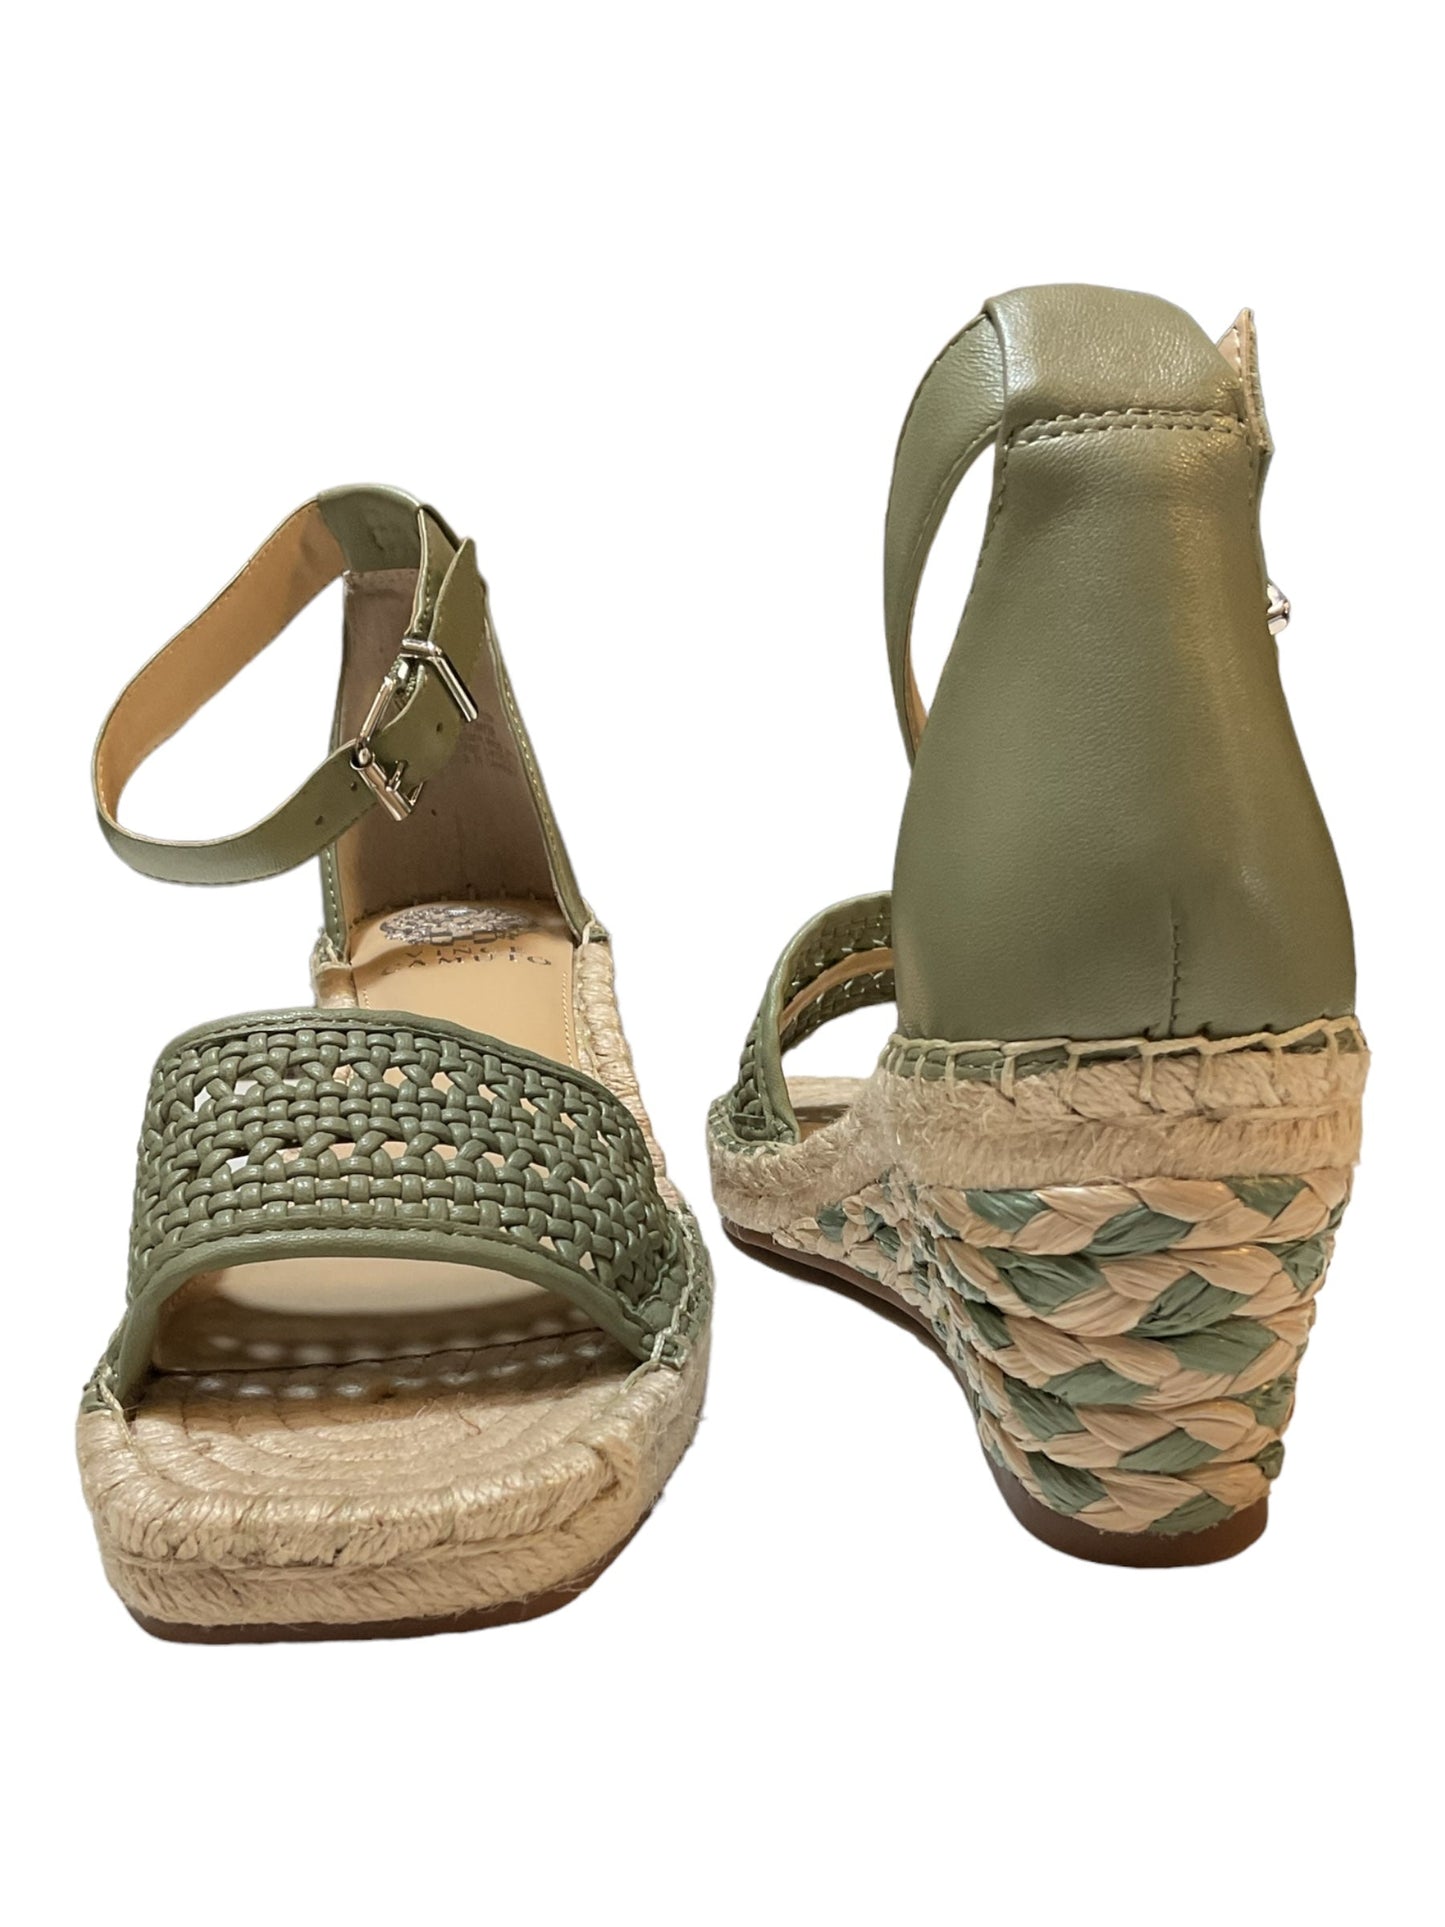 Sandals Heels Wedge By Vince Camuto  Size: 7.5